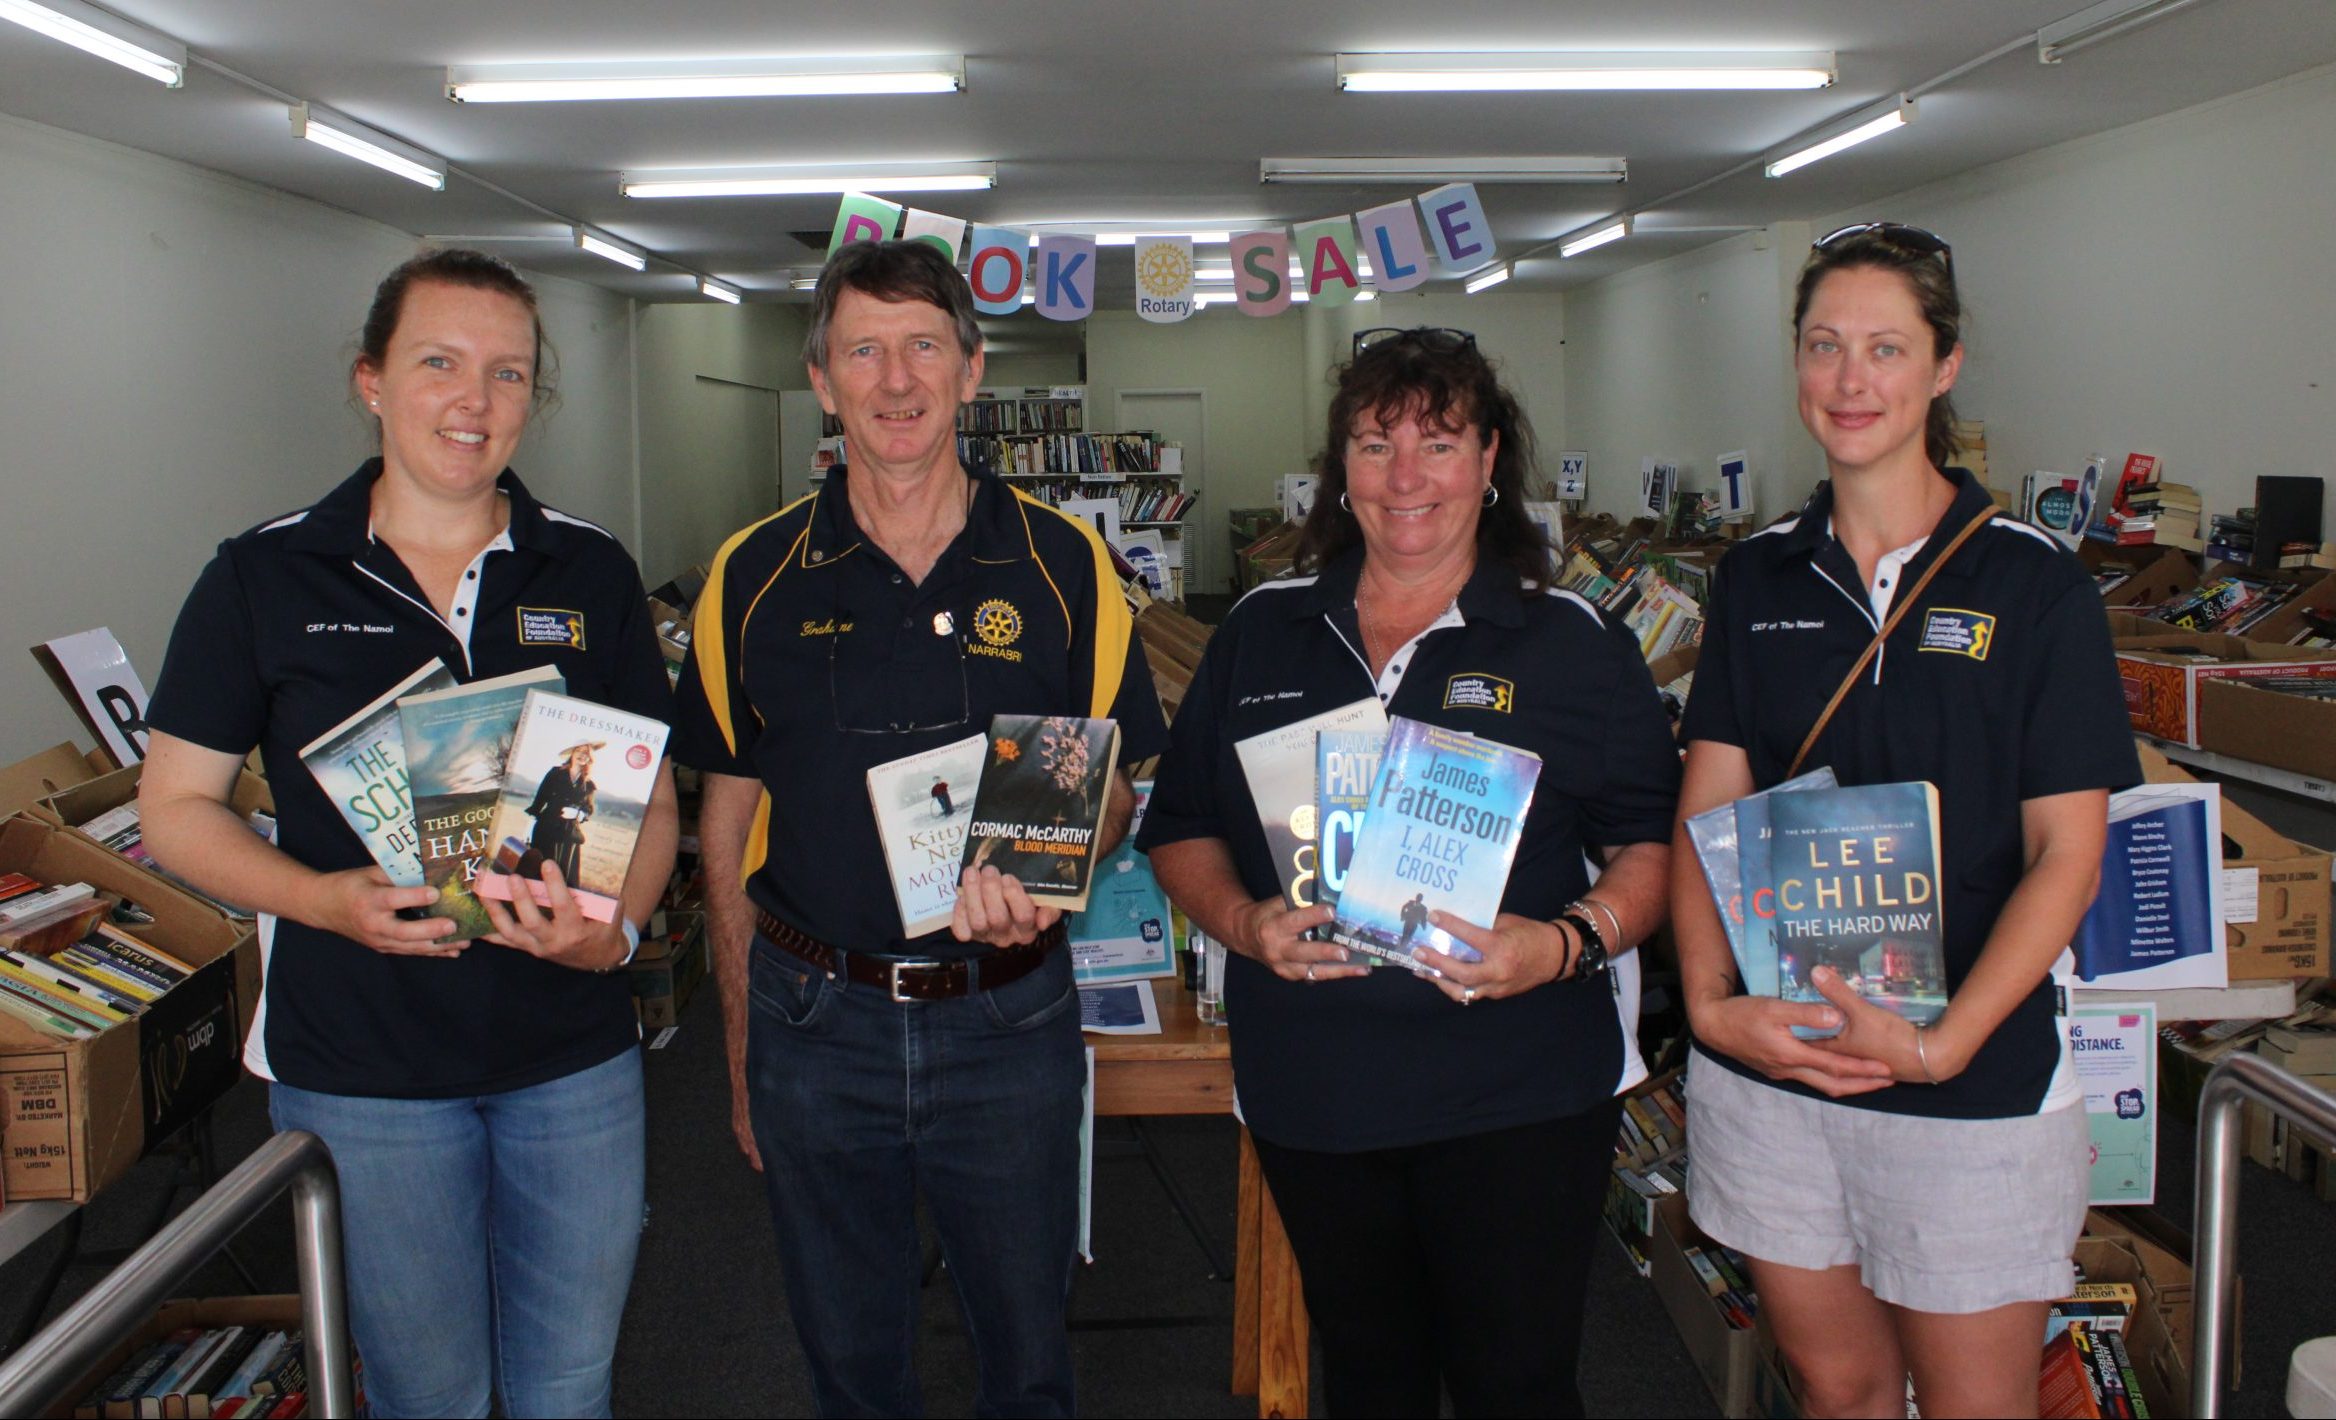 Rotary Club book sale benefits Country Education Foundation